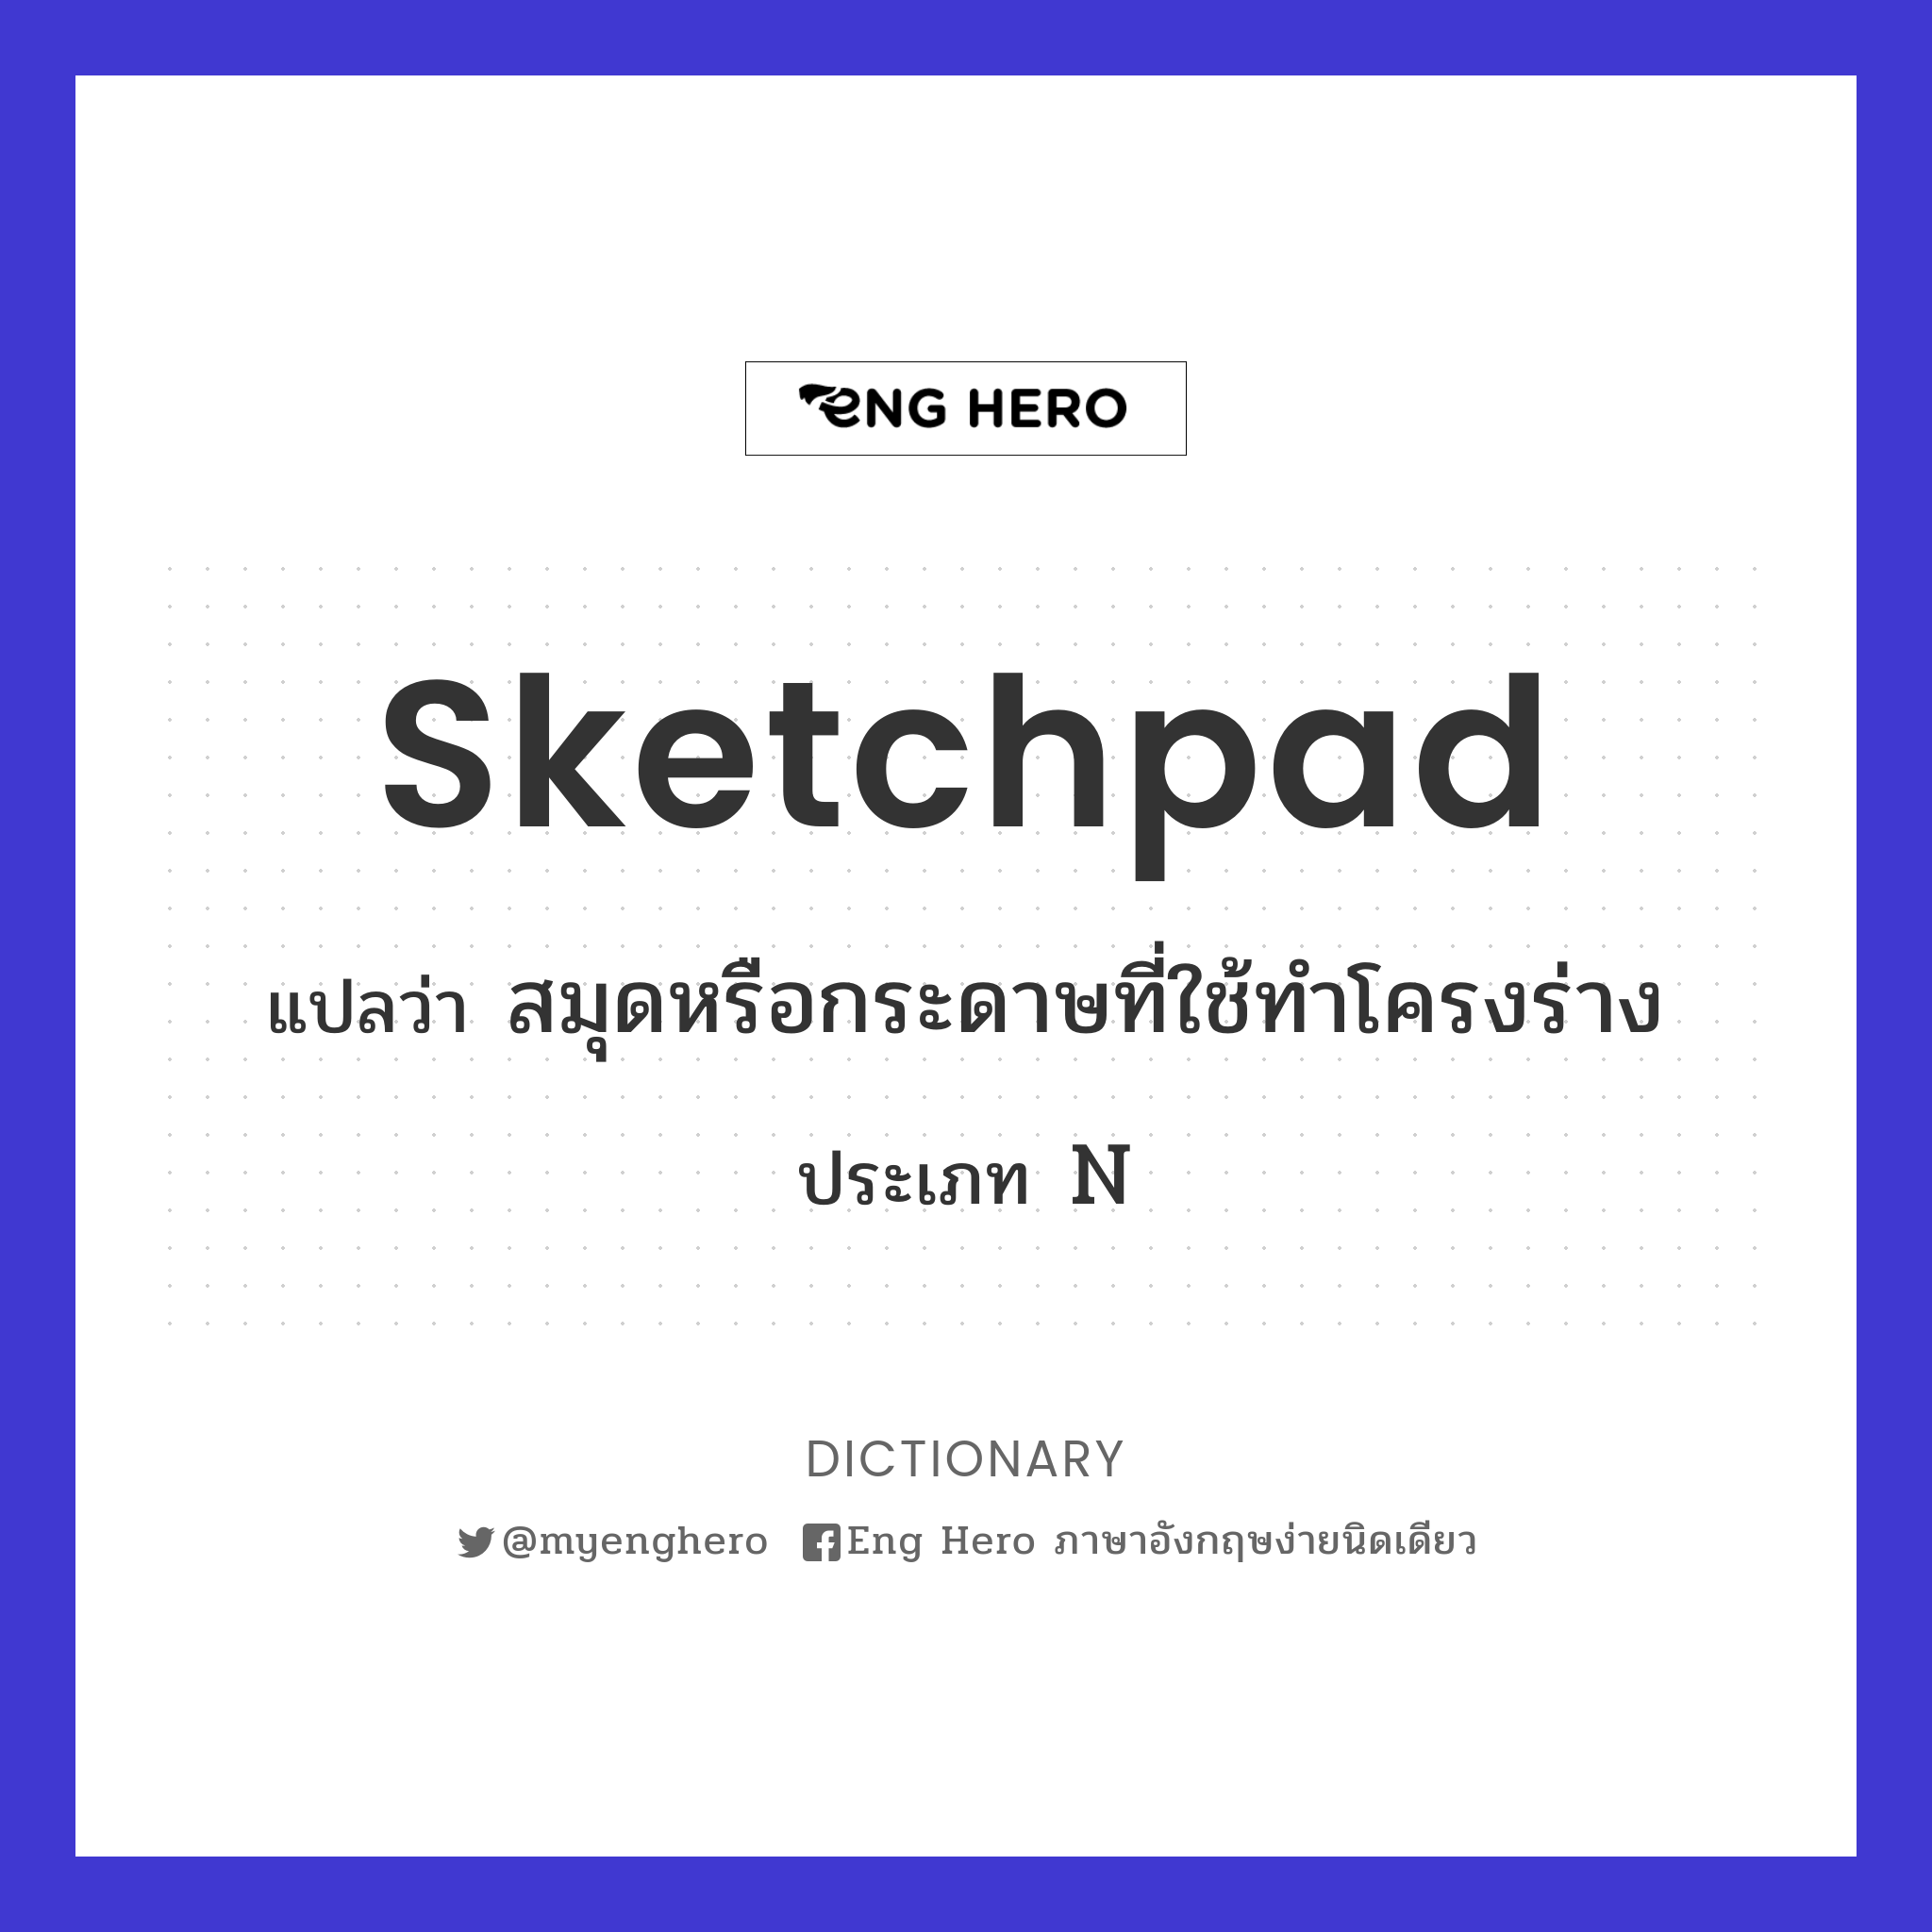 sketchpad